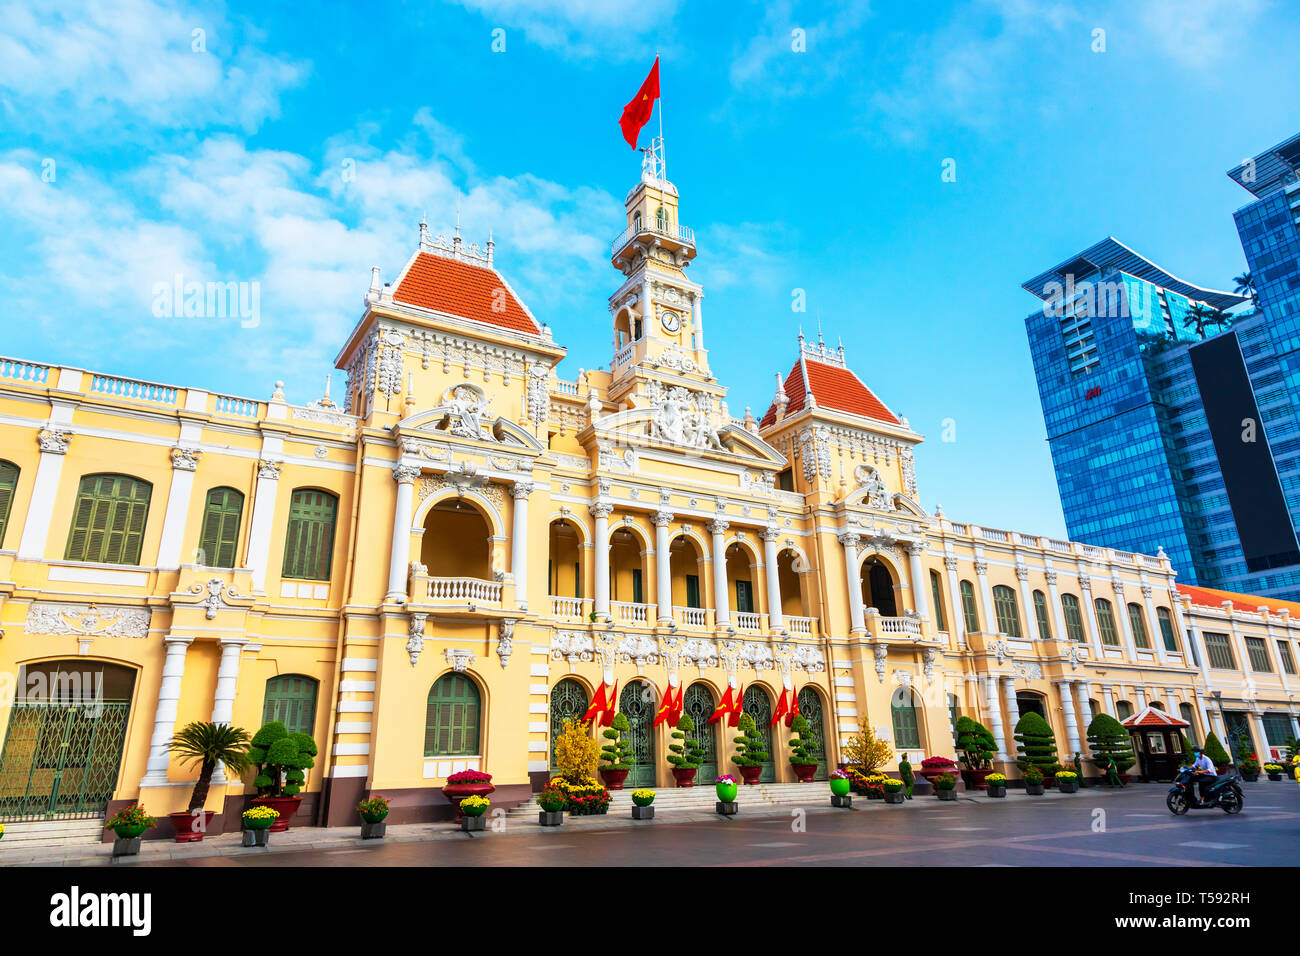 Hotel de Ville, (1901 - 1908) a neo-baroque french architecture building at the northern end of Nguyen Hue Boulevard Ho Chi Minh City, Vietnam Stock Photo